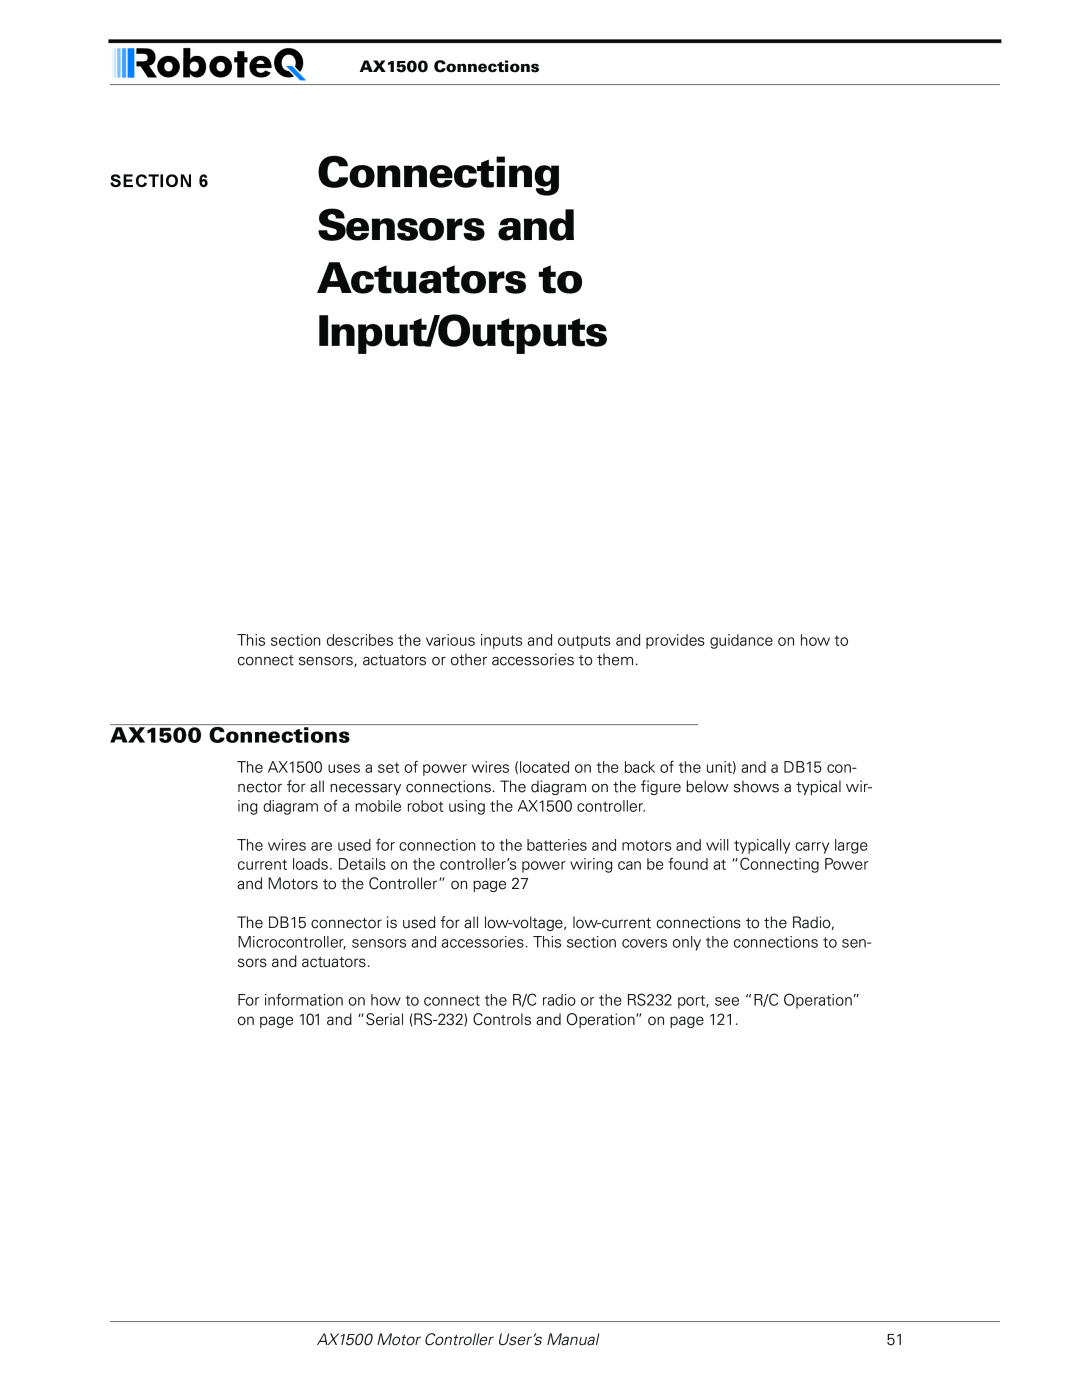 RoboteQ Connecting Sensors and Actuators to Input/Outputs, AX1500 Connections, AX1500 Motor Controller User’s Manual 